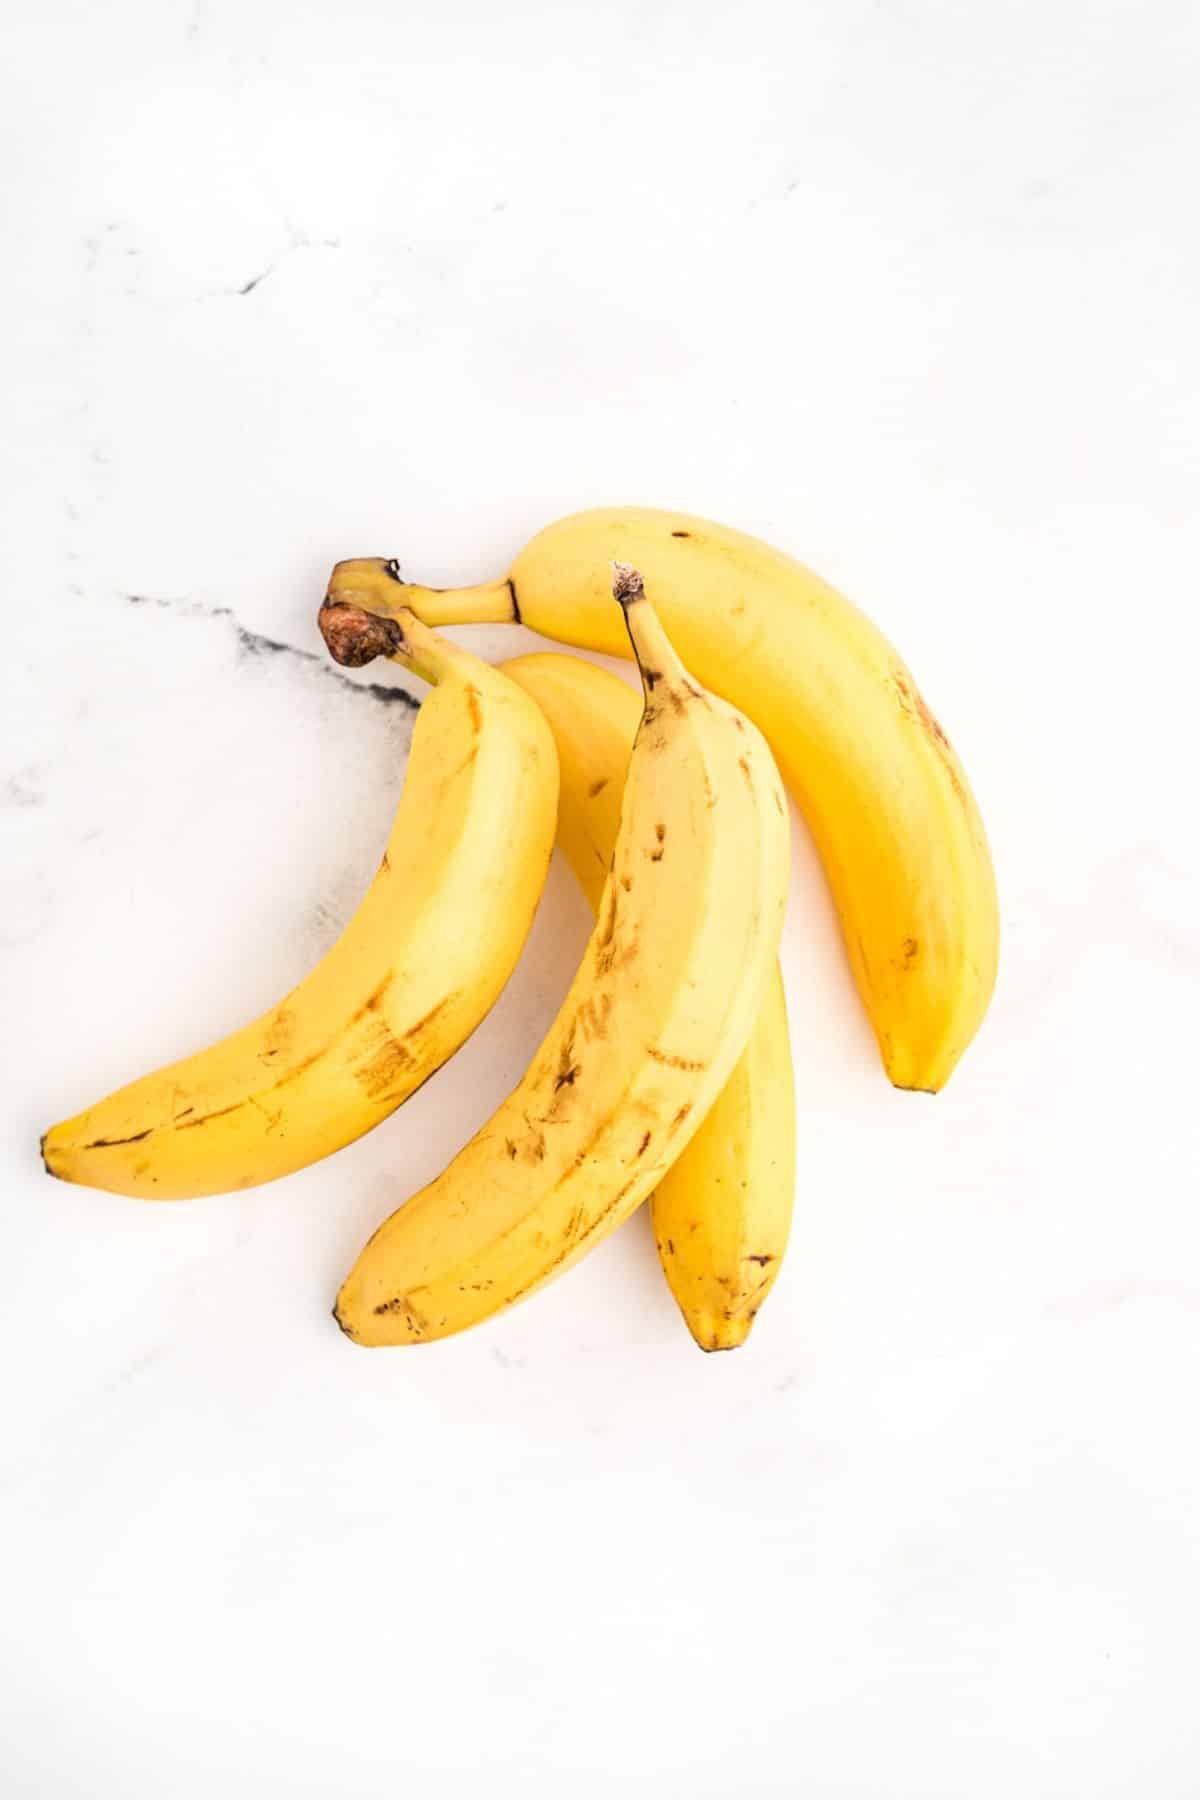 Four ripe unpeeled bananas on a white surface.